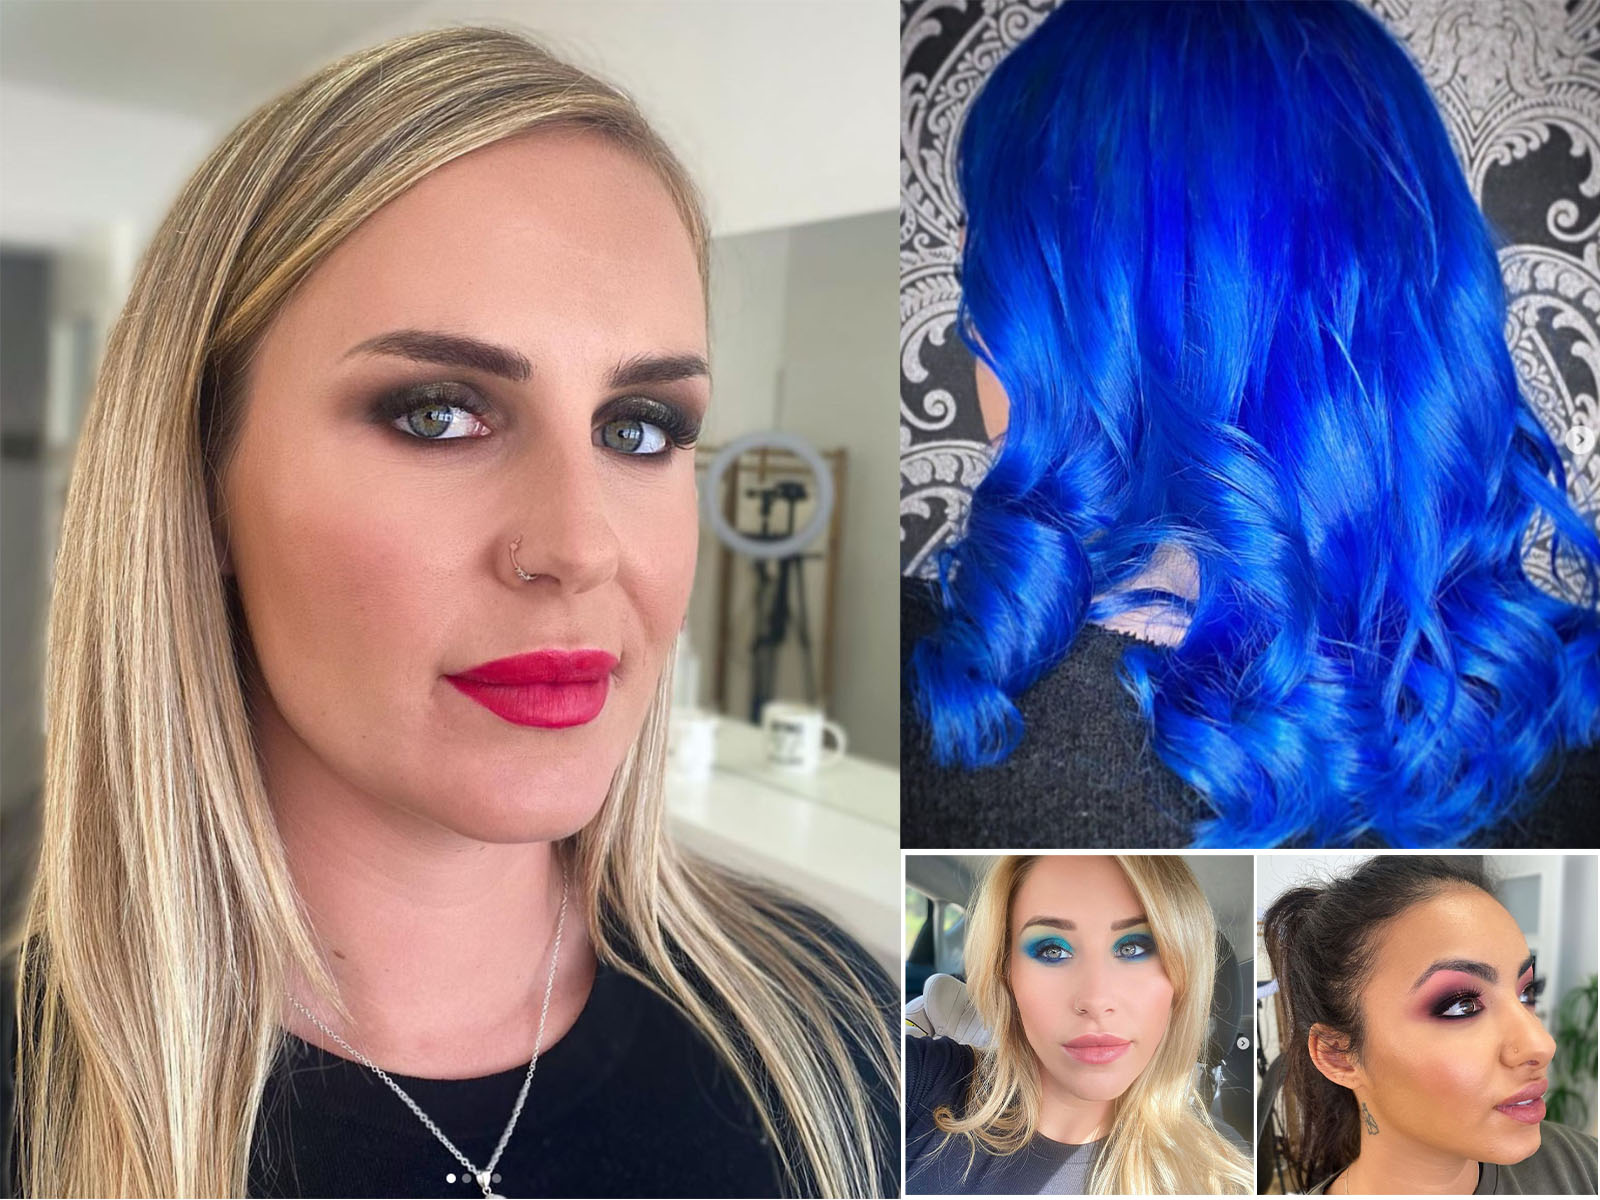 Hairdresser English Speaking in Torre del Mar, be YOU tiful, professional makeup artist in Axarquia, Wedding hair, 10 years hairdressing experience